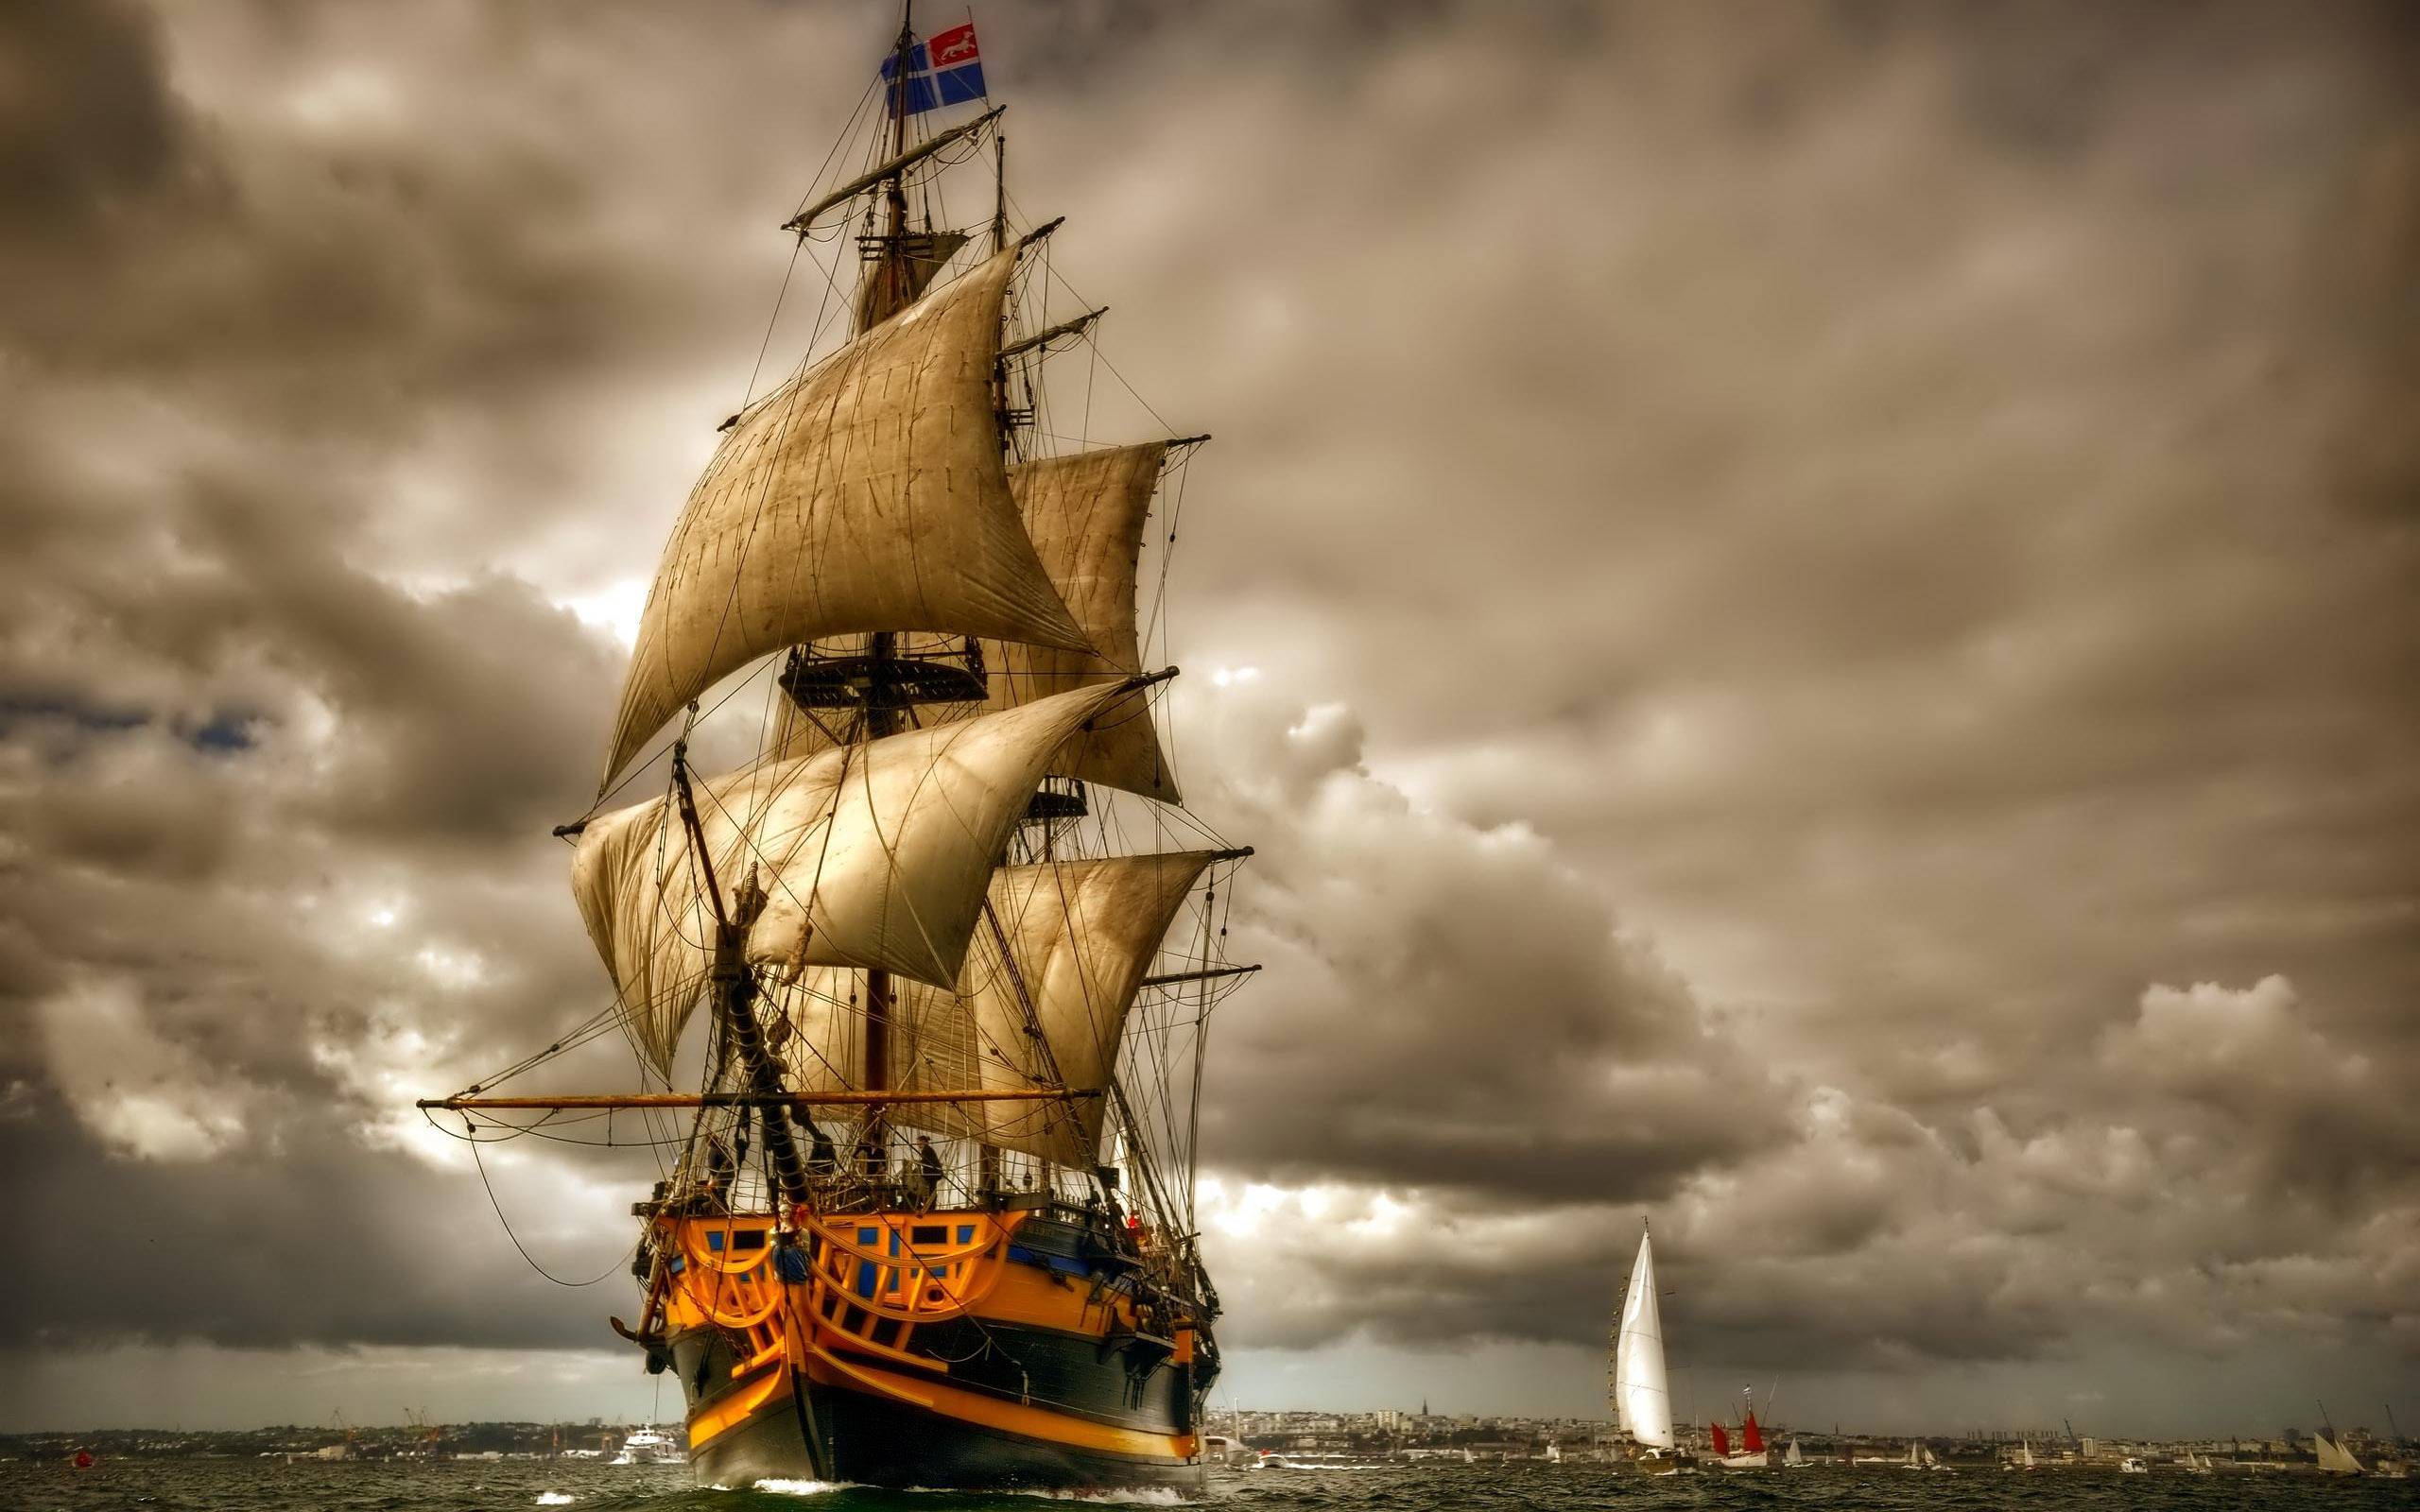 Wallpapers sailboat Navy ships and boats on the desktop